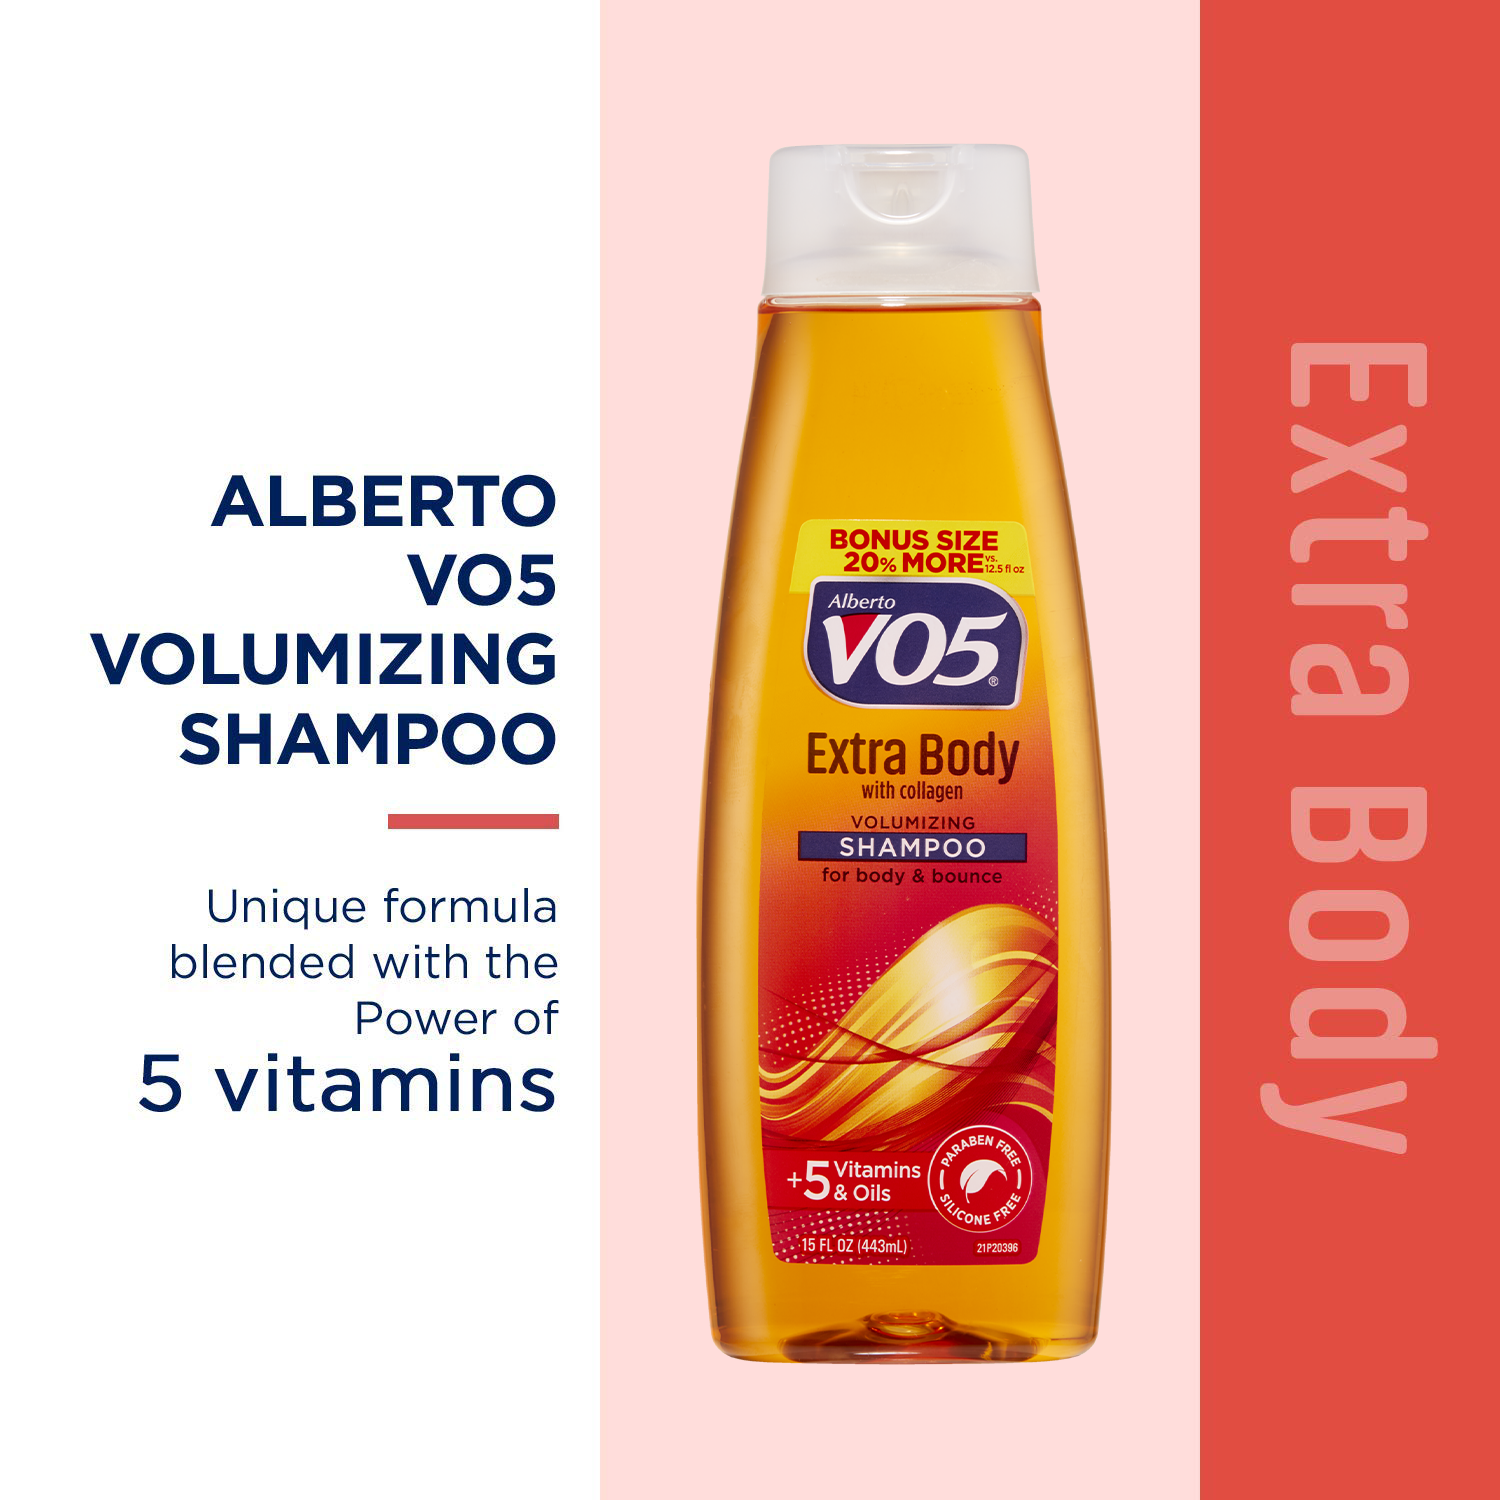 Alberto VO5 Extra Body Hair Shampoo, with Collagen, for Fullness and Volume, 15 fl oz - image 4 of 7